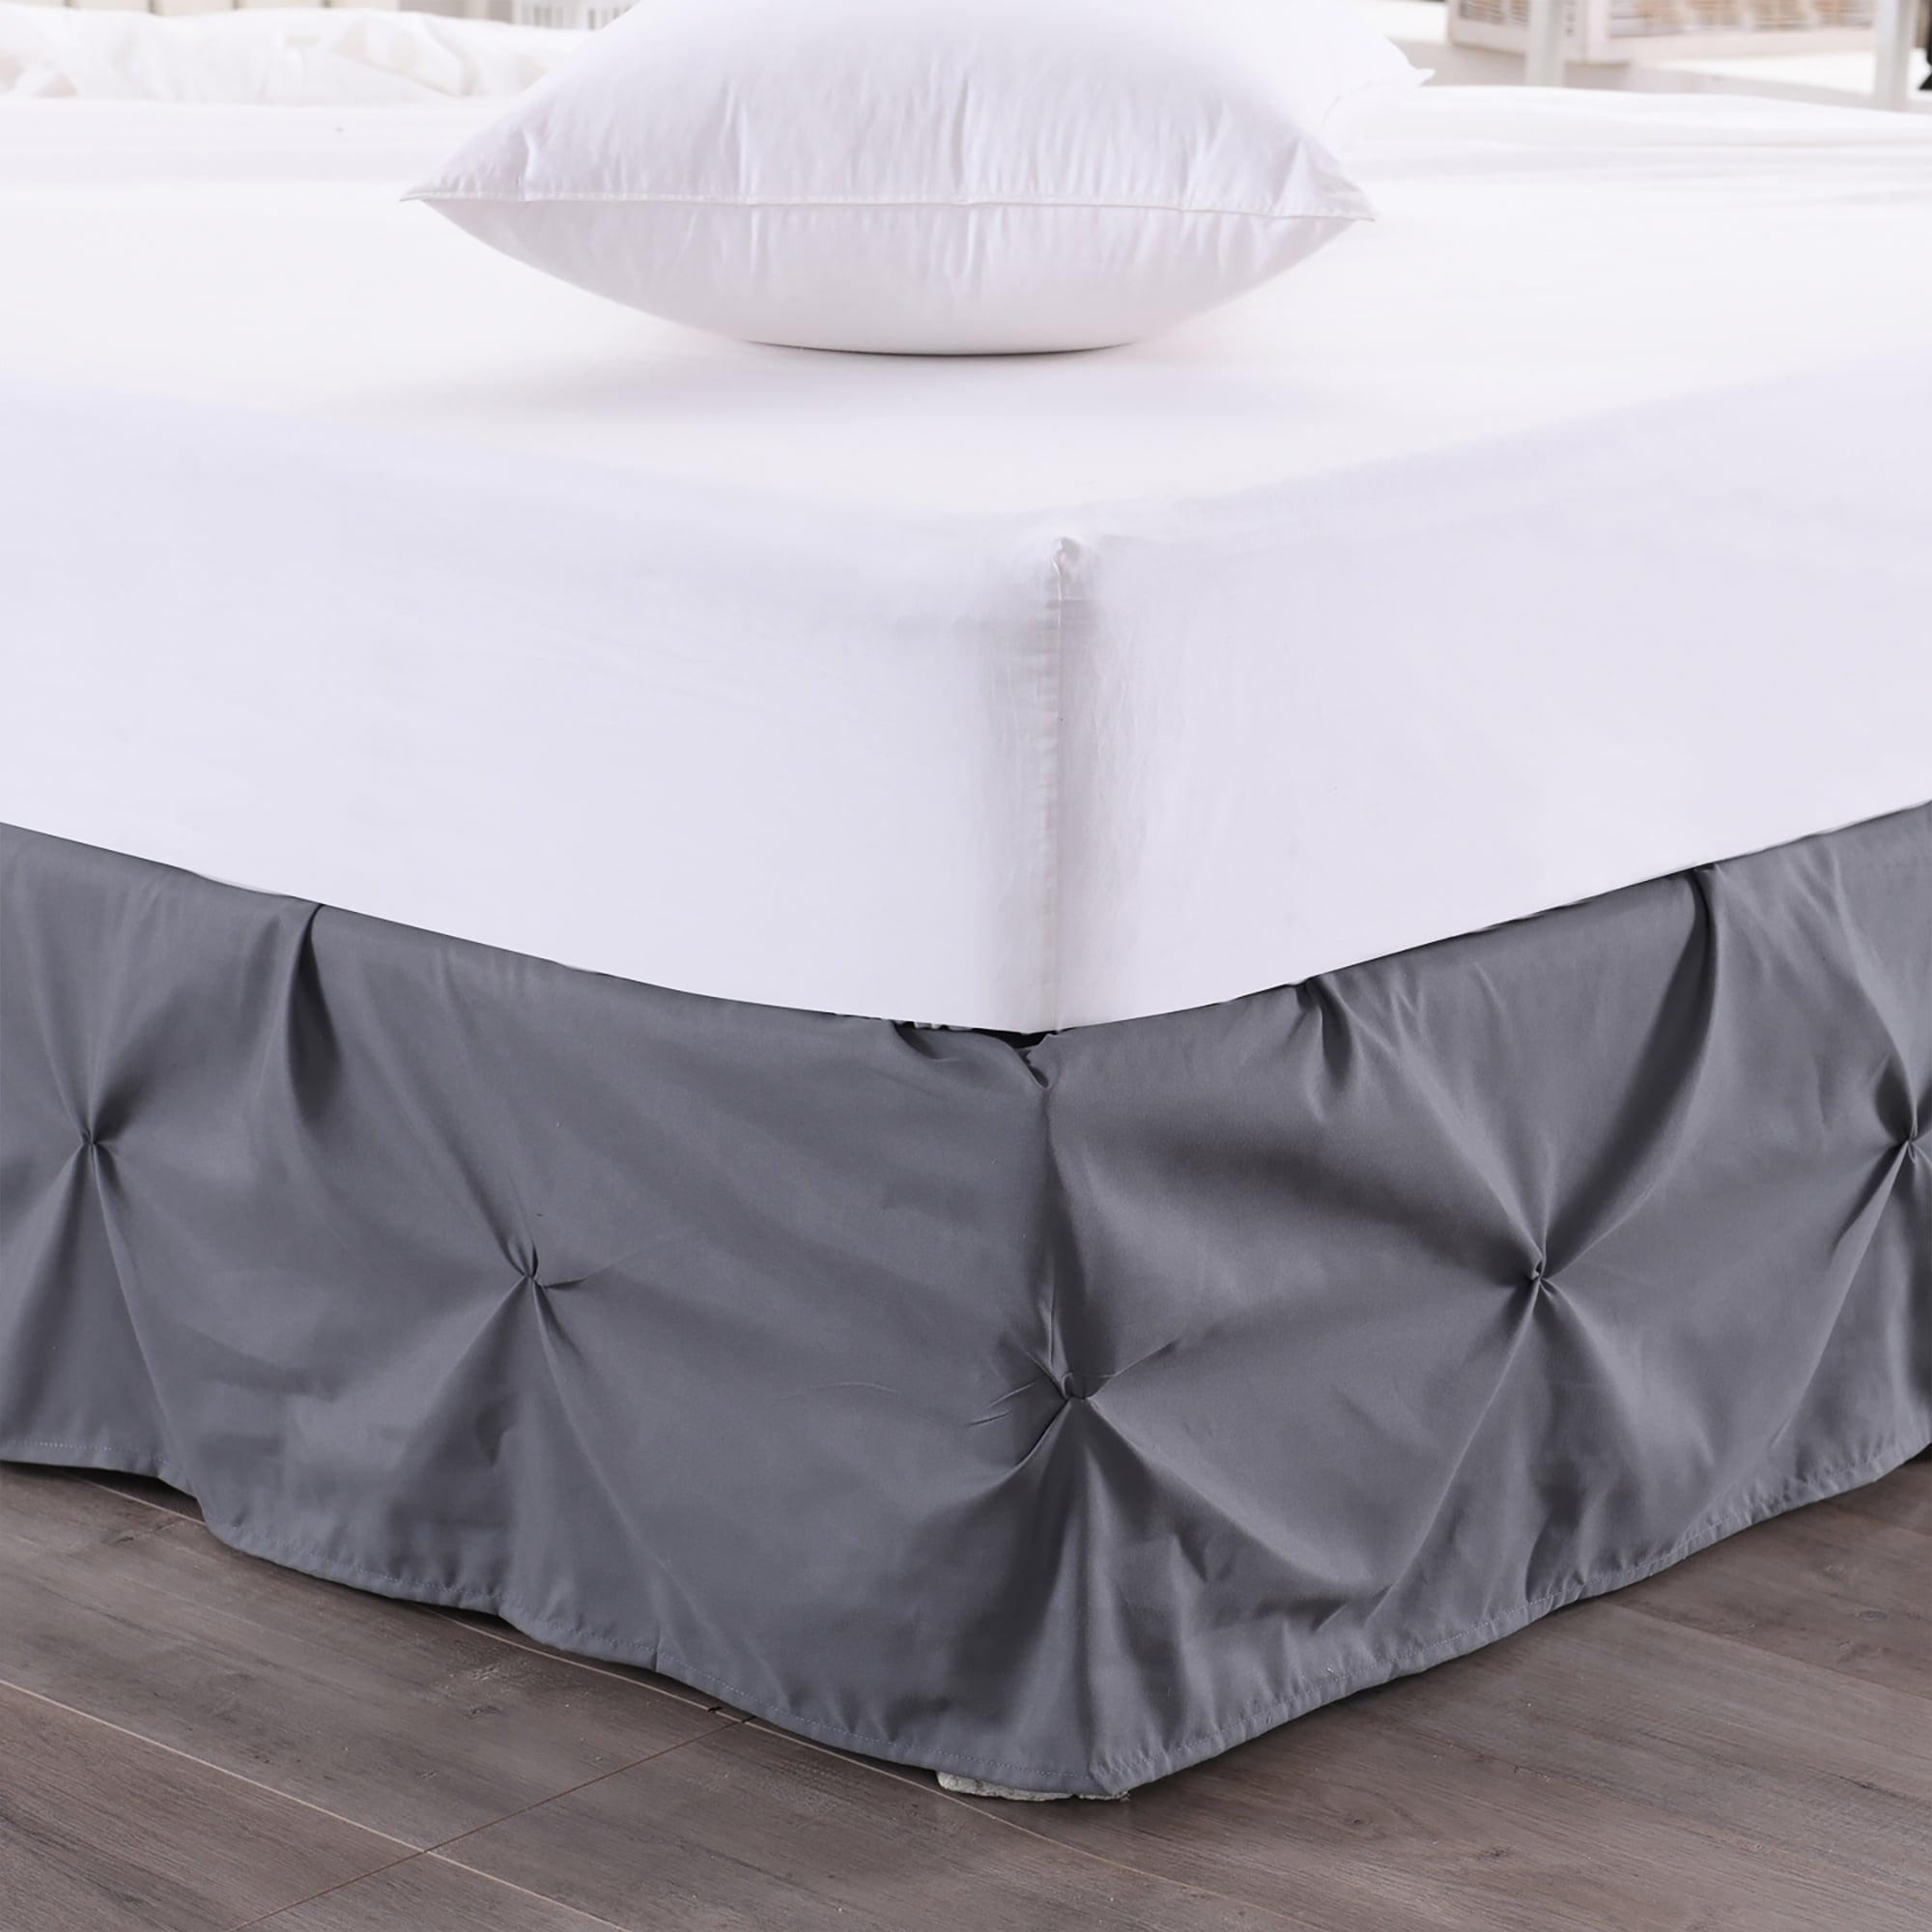 SOLID NAVY BLUE Twin Queen or King BEDSKIRT 100% COTTON DUST RUFFLE BED SKIRT 